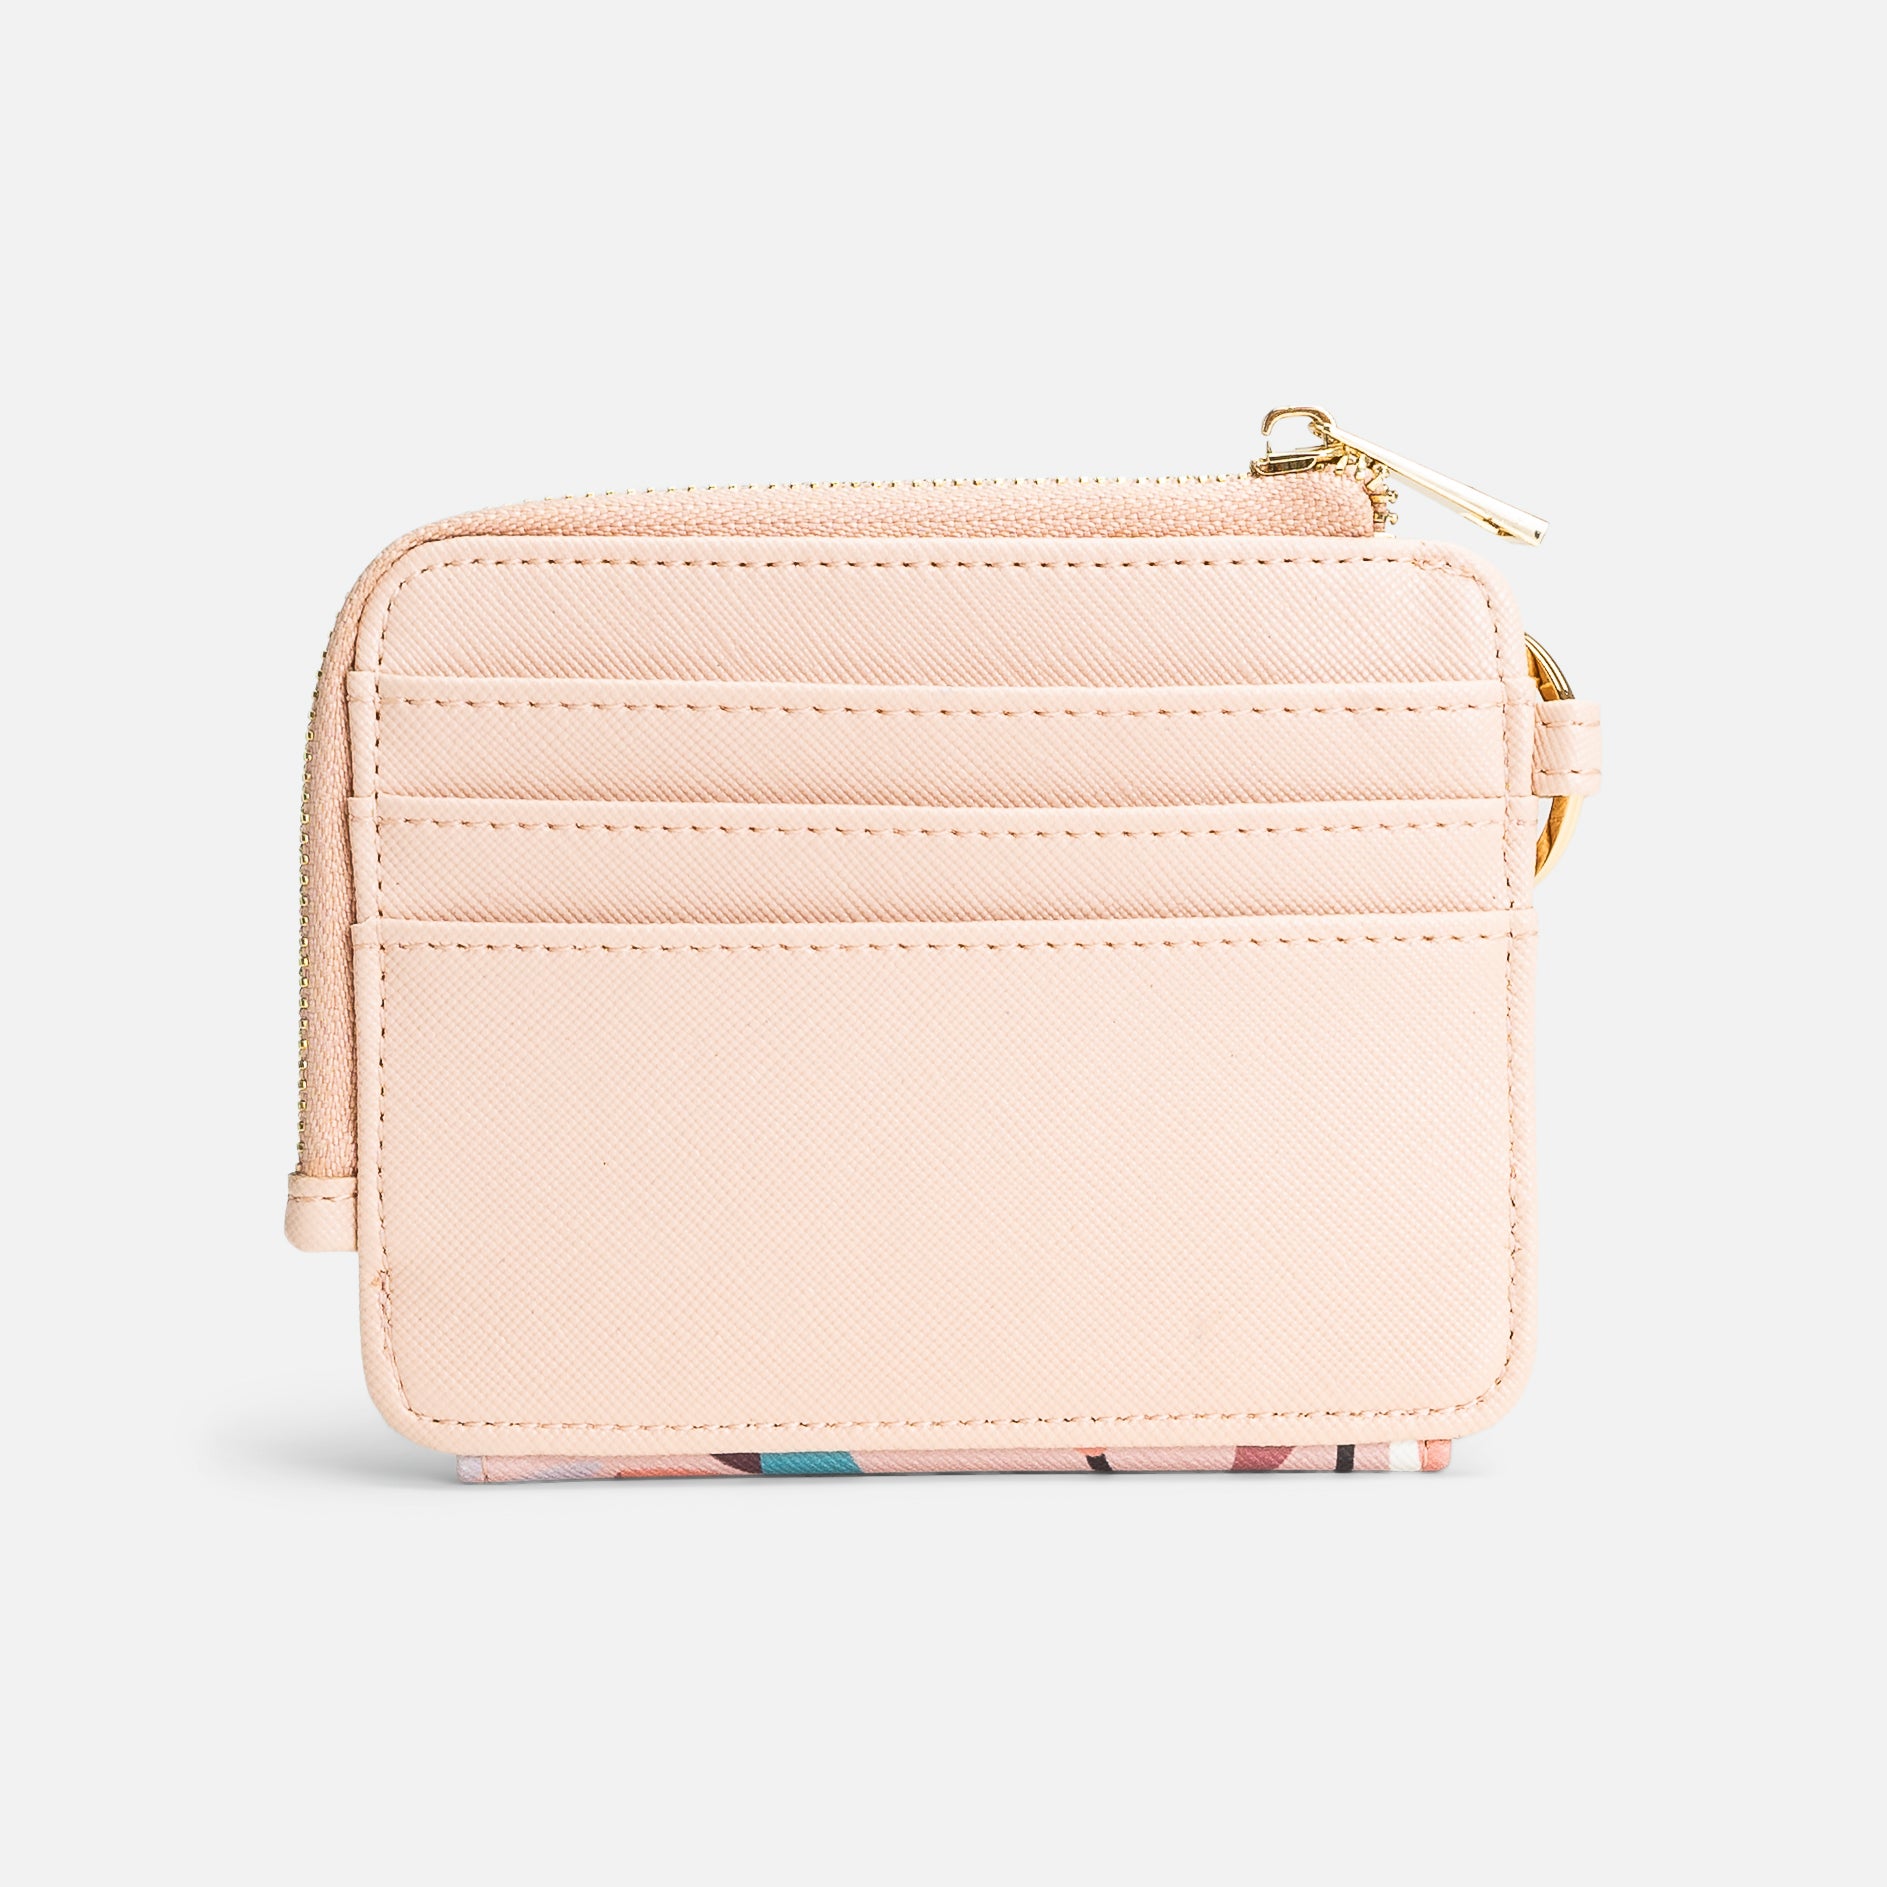 Small pink wallet with flowers 